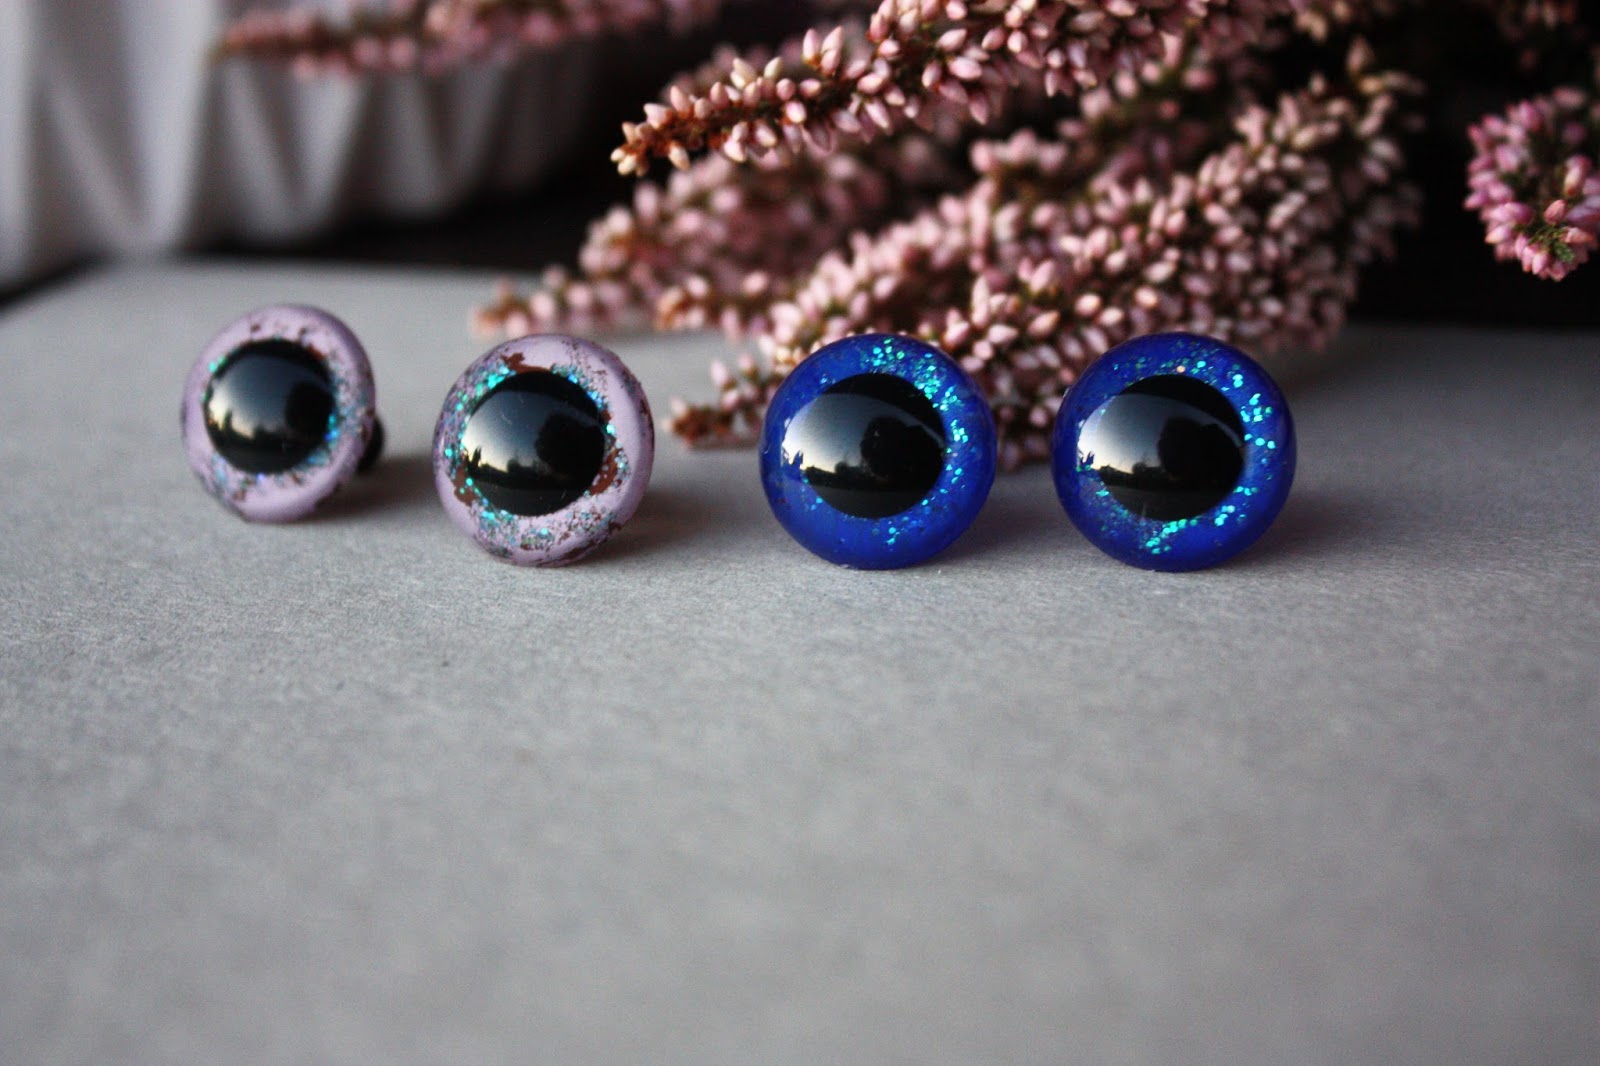 Happyamigurumi Hand Painted Safety Eyes 12mm And 18mm Eyes For 